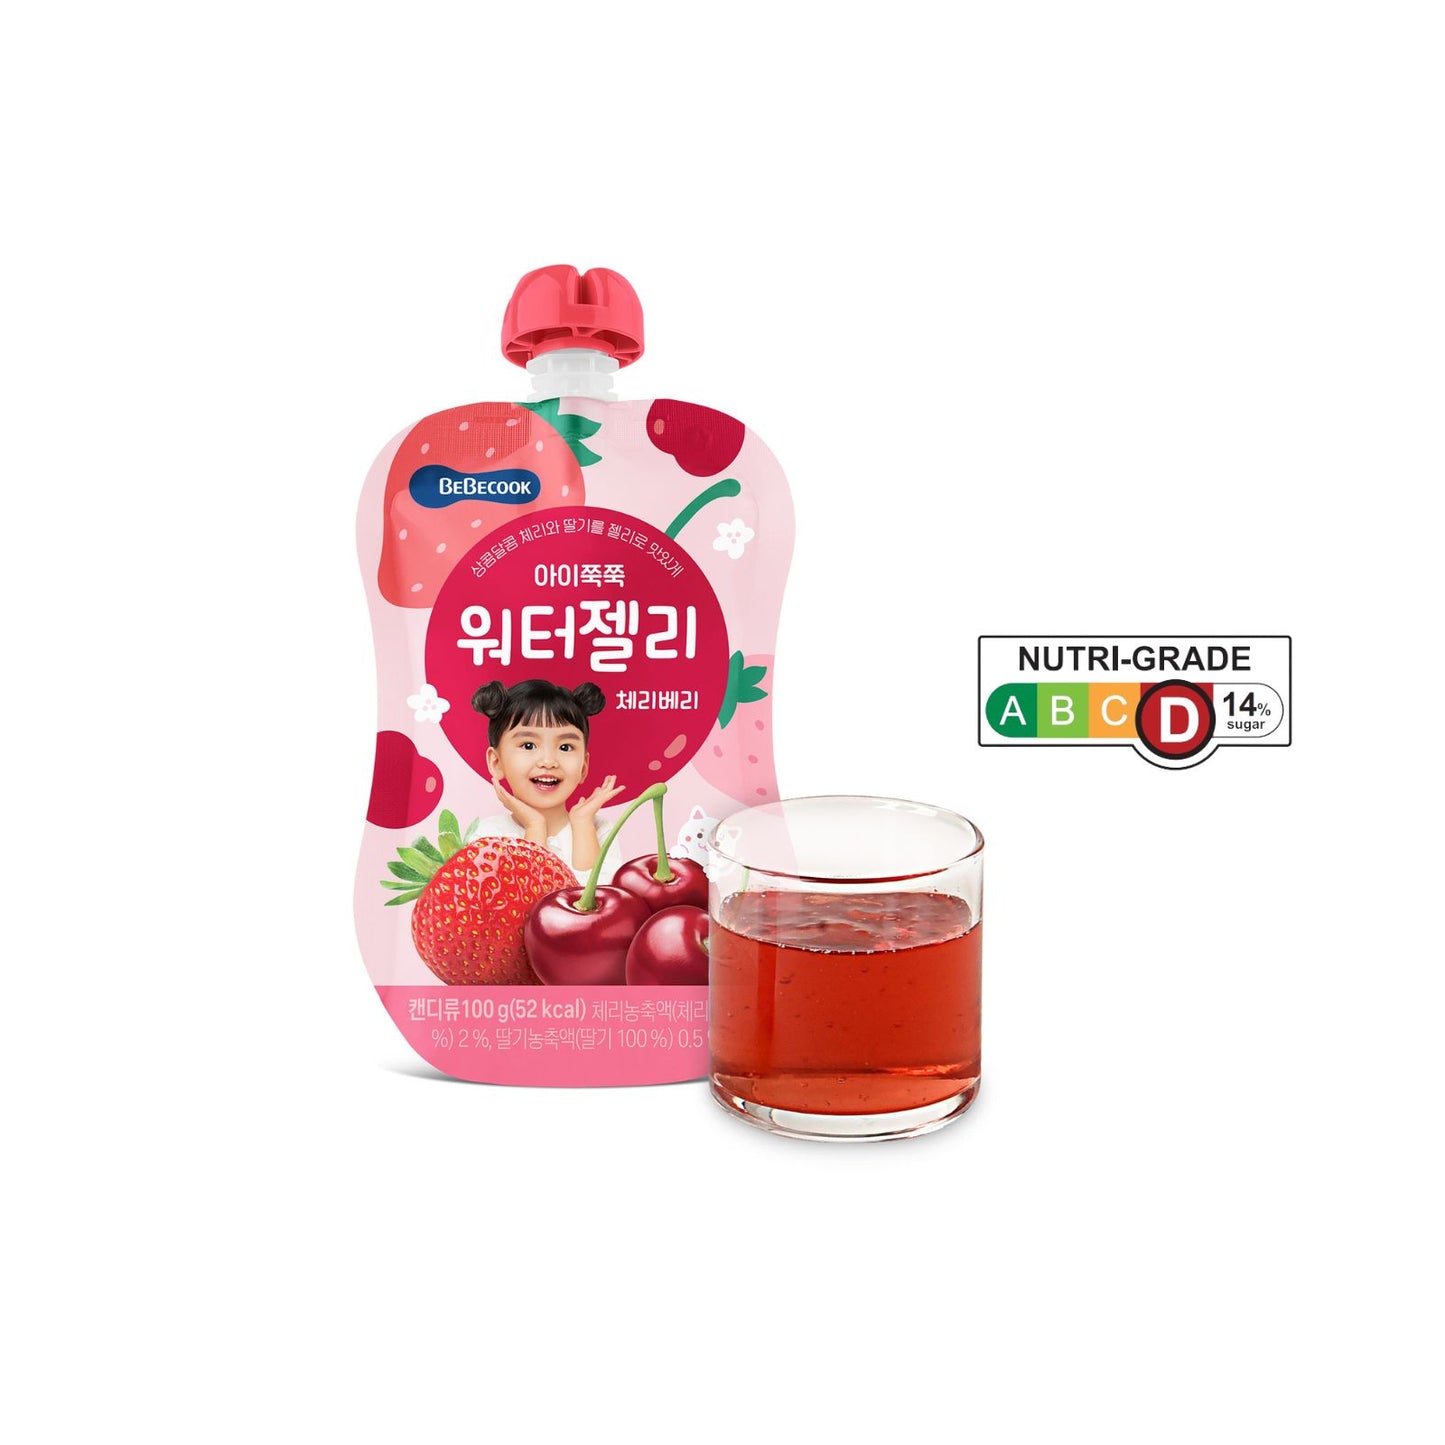 BeBecook - My First juicy Jelly Drink (Strawberry & Cherry)